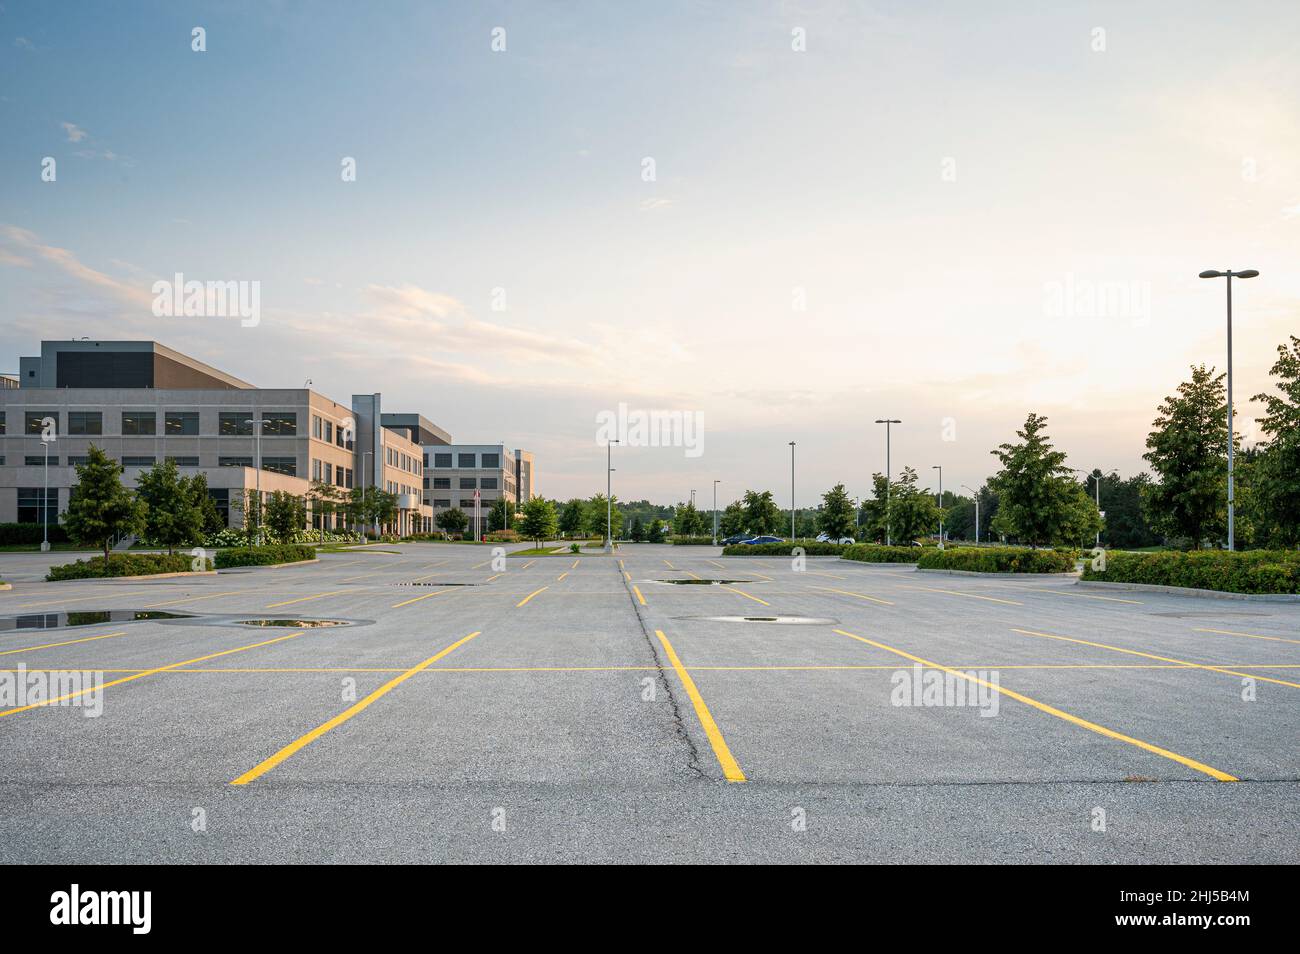 Empty parking lot next to office building. Stock Photo